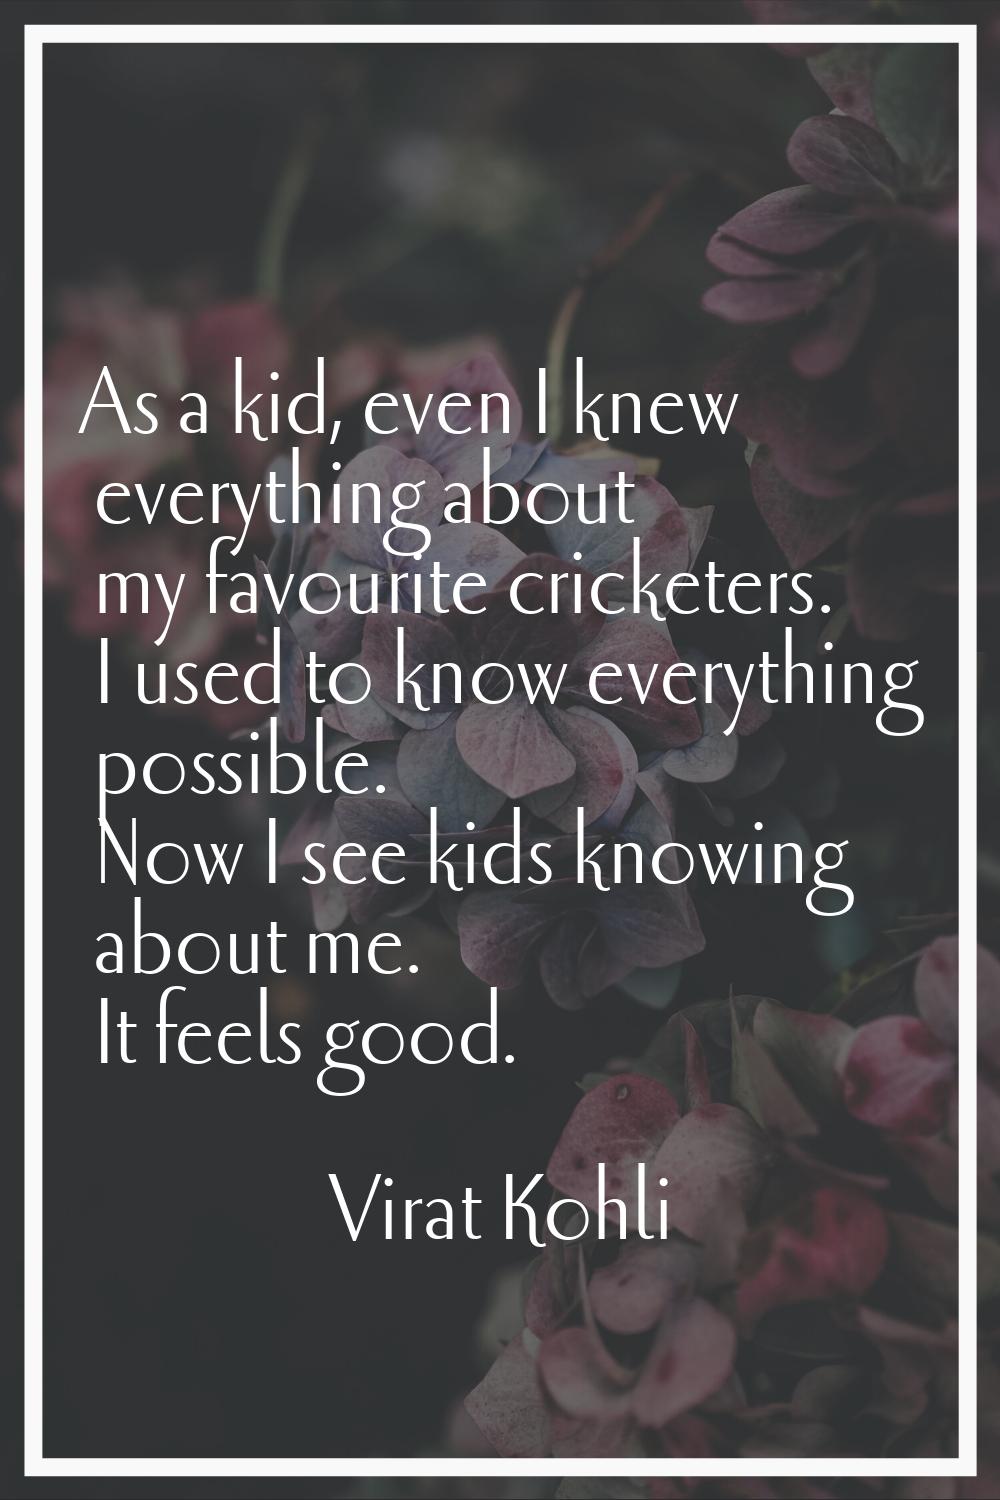 As a kid, even I knew everything about my favourite cricketers. I used to know everything possible.